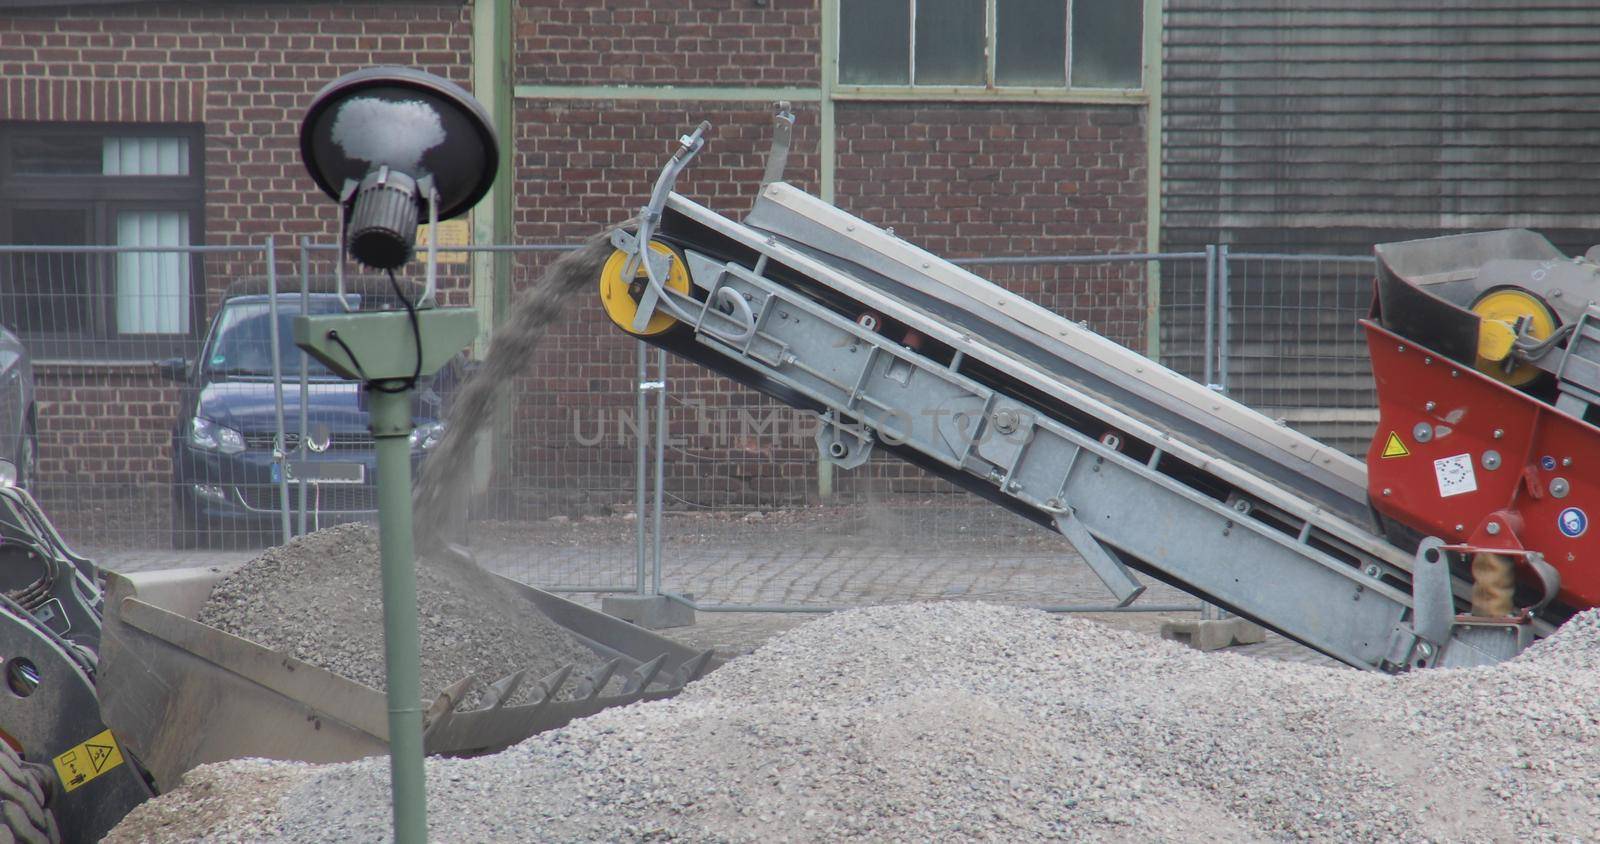 Conveyor belt brings stones to the crusher for crushing